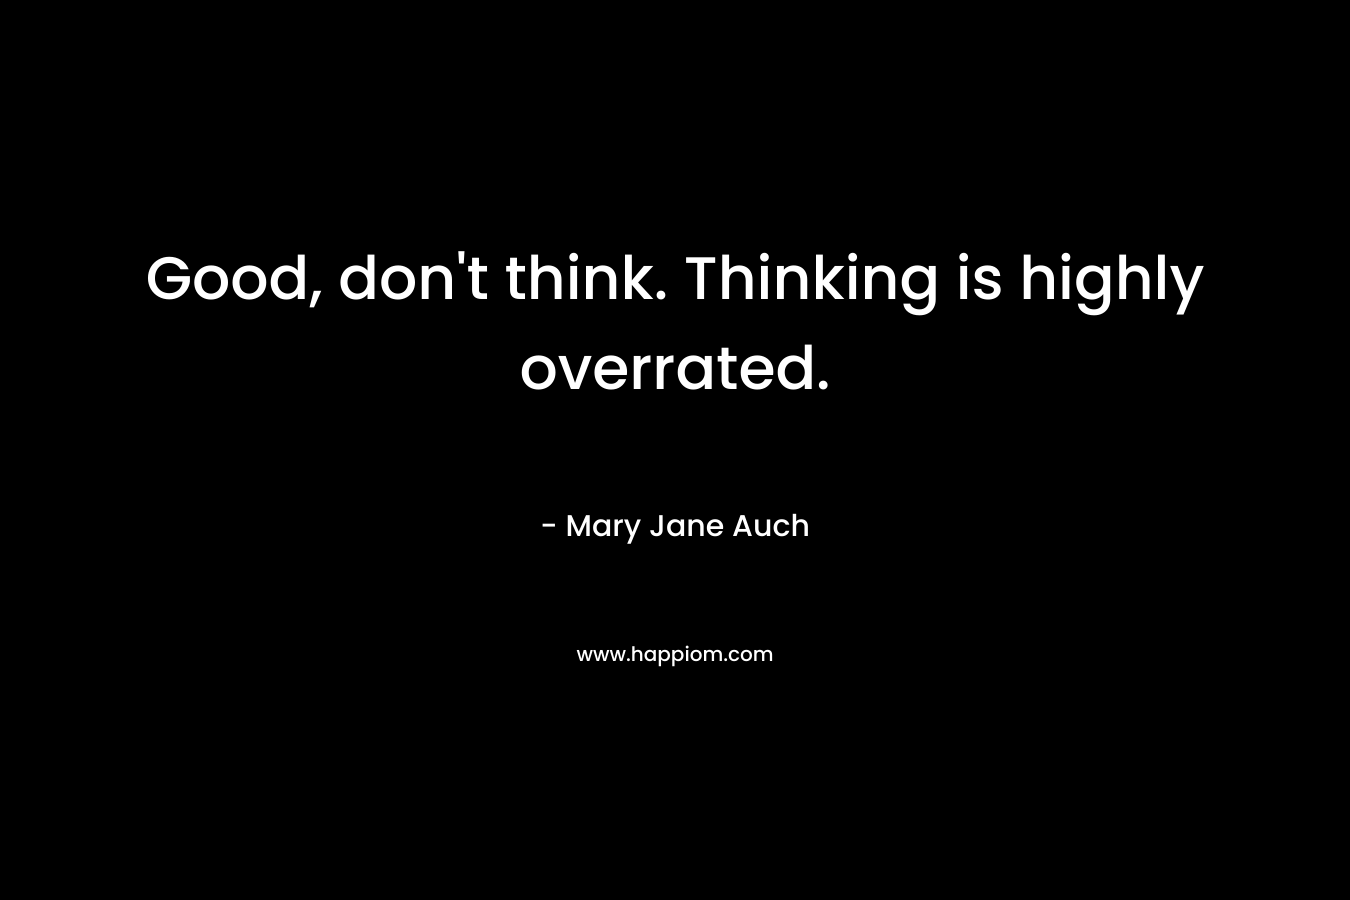 Good, don't think. Thinking is highly overrated.